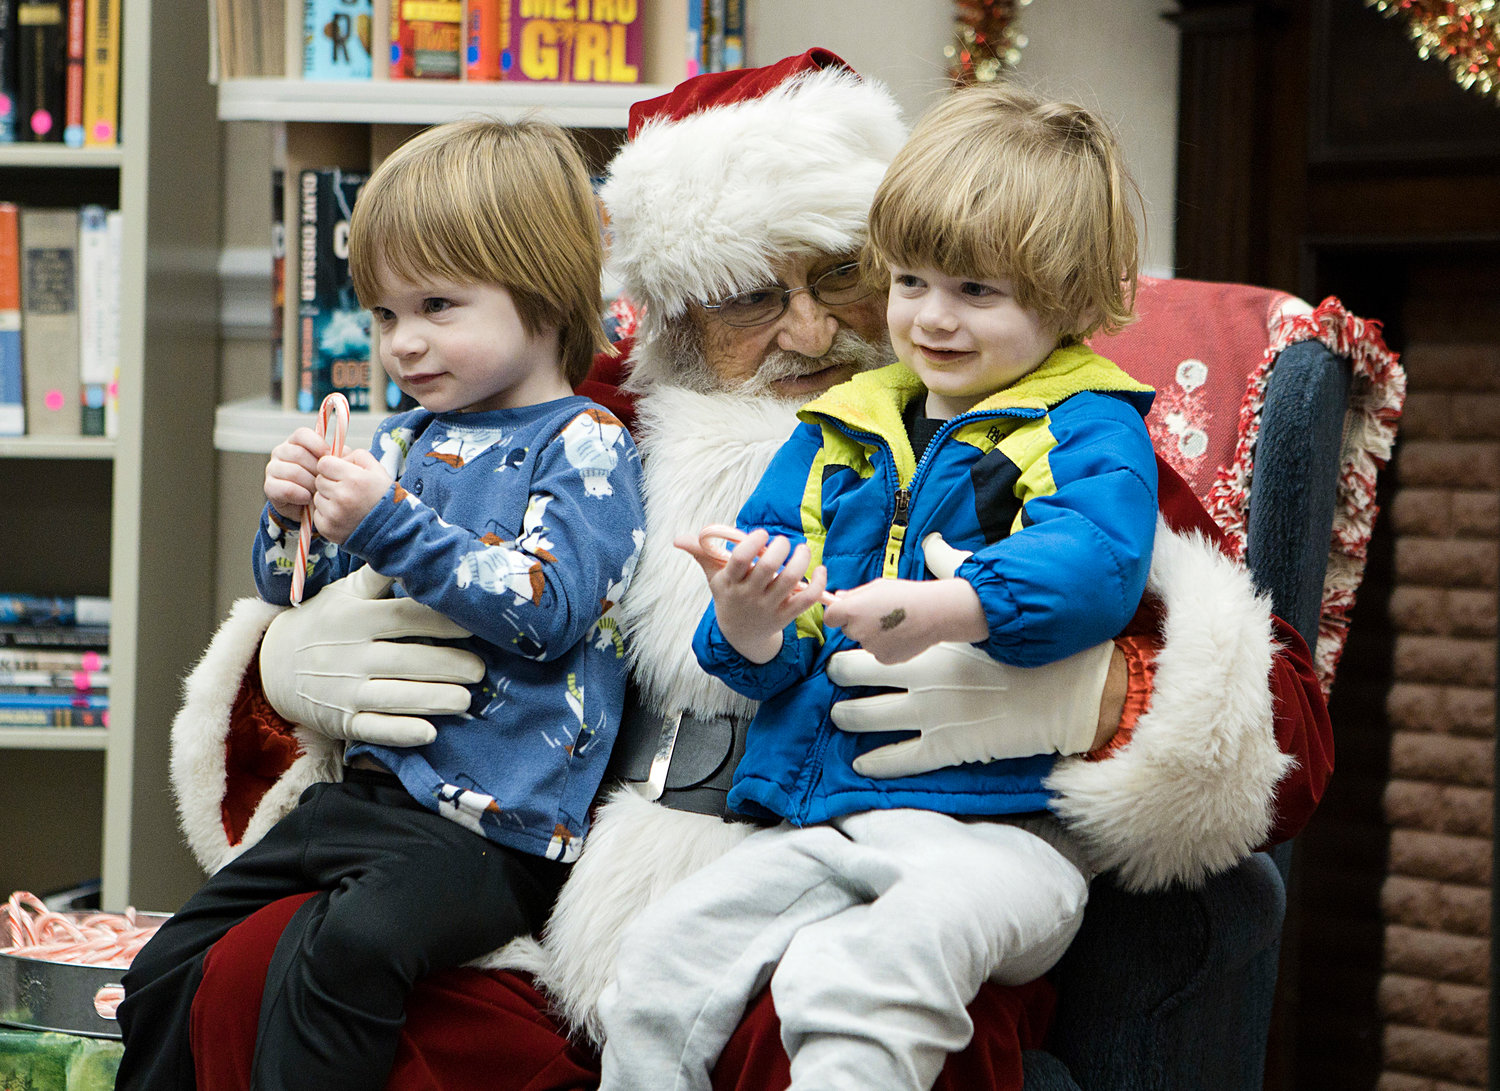 Val (left) and Desi Nicholas sit on Santa’s lap clutching candy canes.